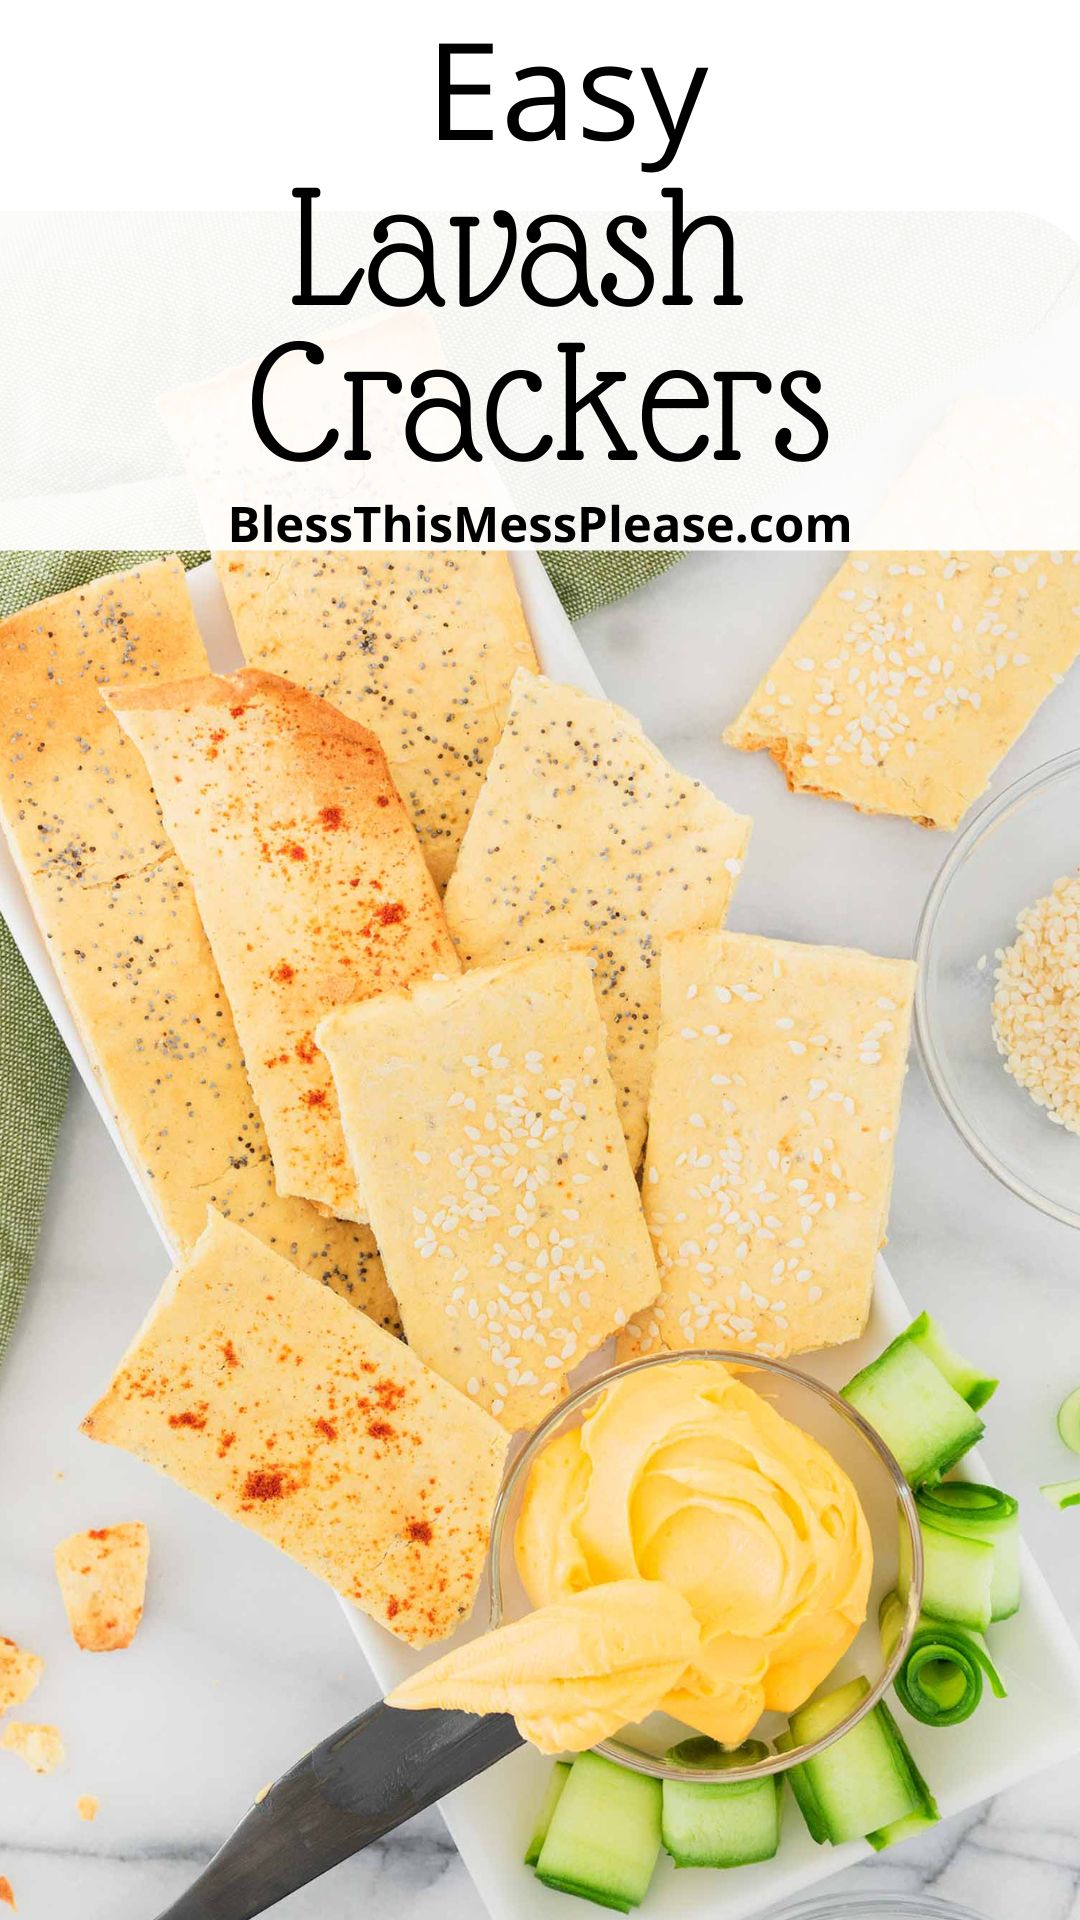 These crispy gluten free lavash crackers are made with just a few simple ingredients that you already have at home and come together fast! via @barbarabakes